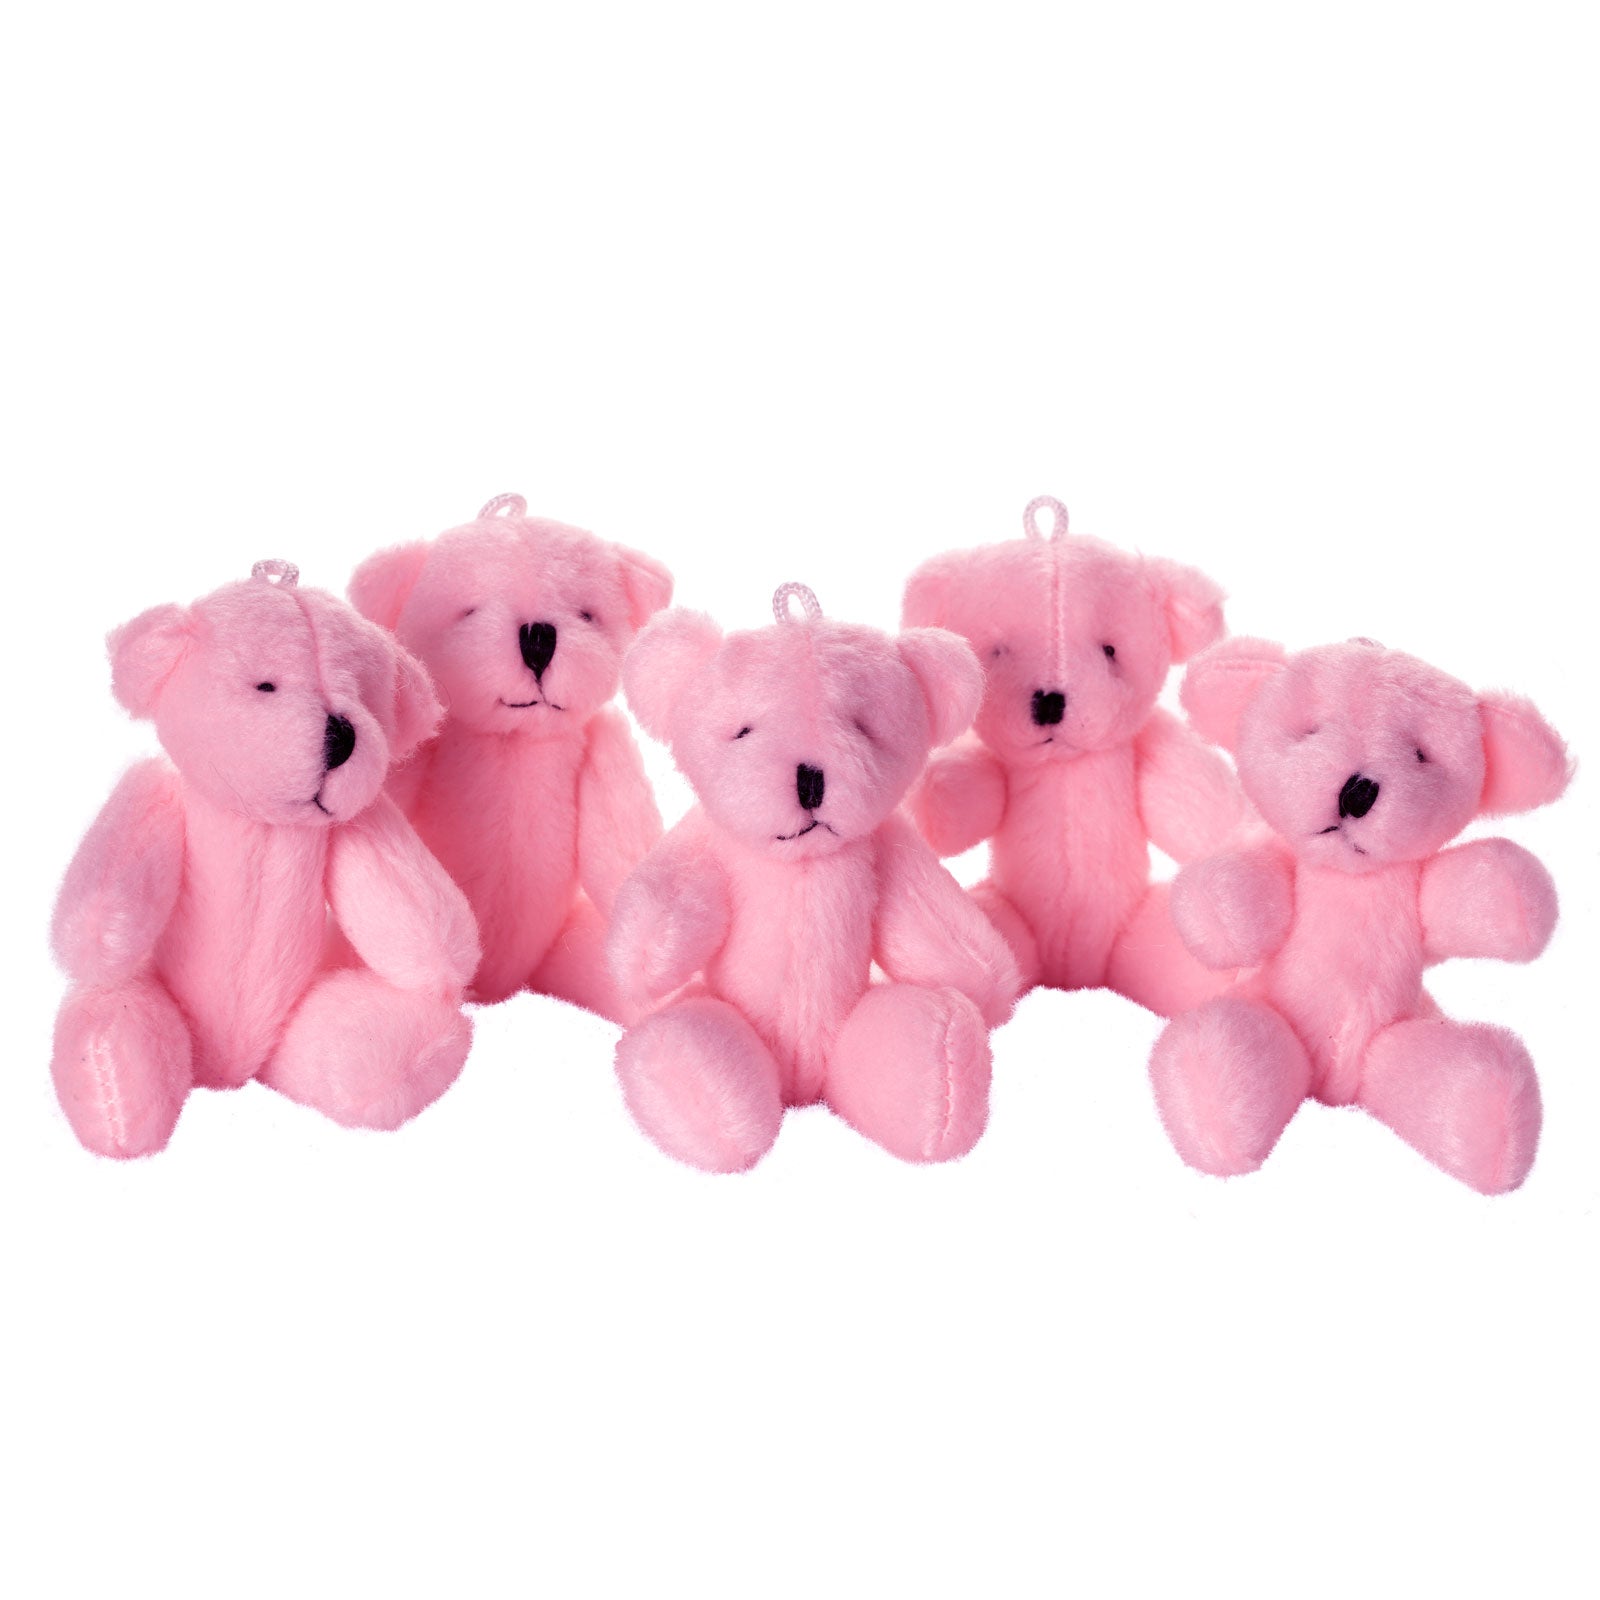 Small PINK Teddy Bears X 90 - Cute Soft Adorable